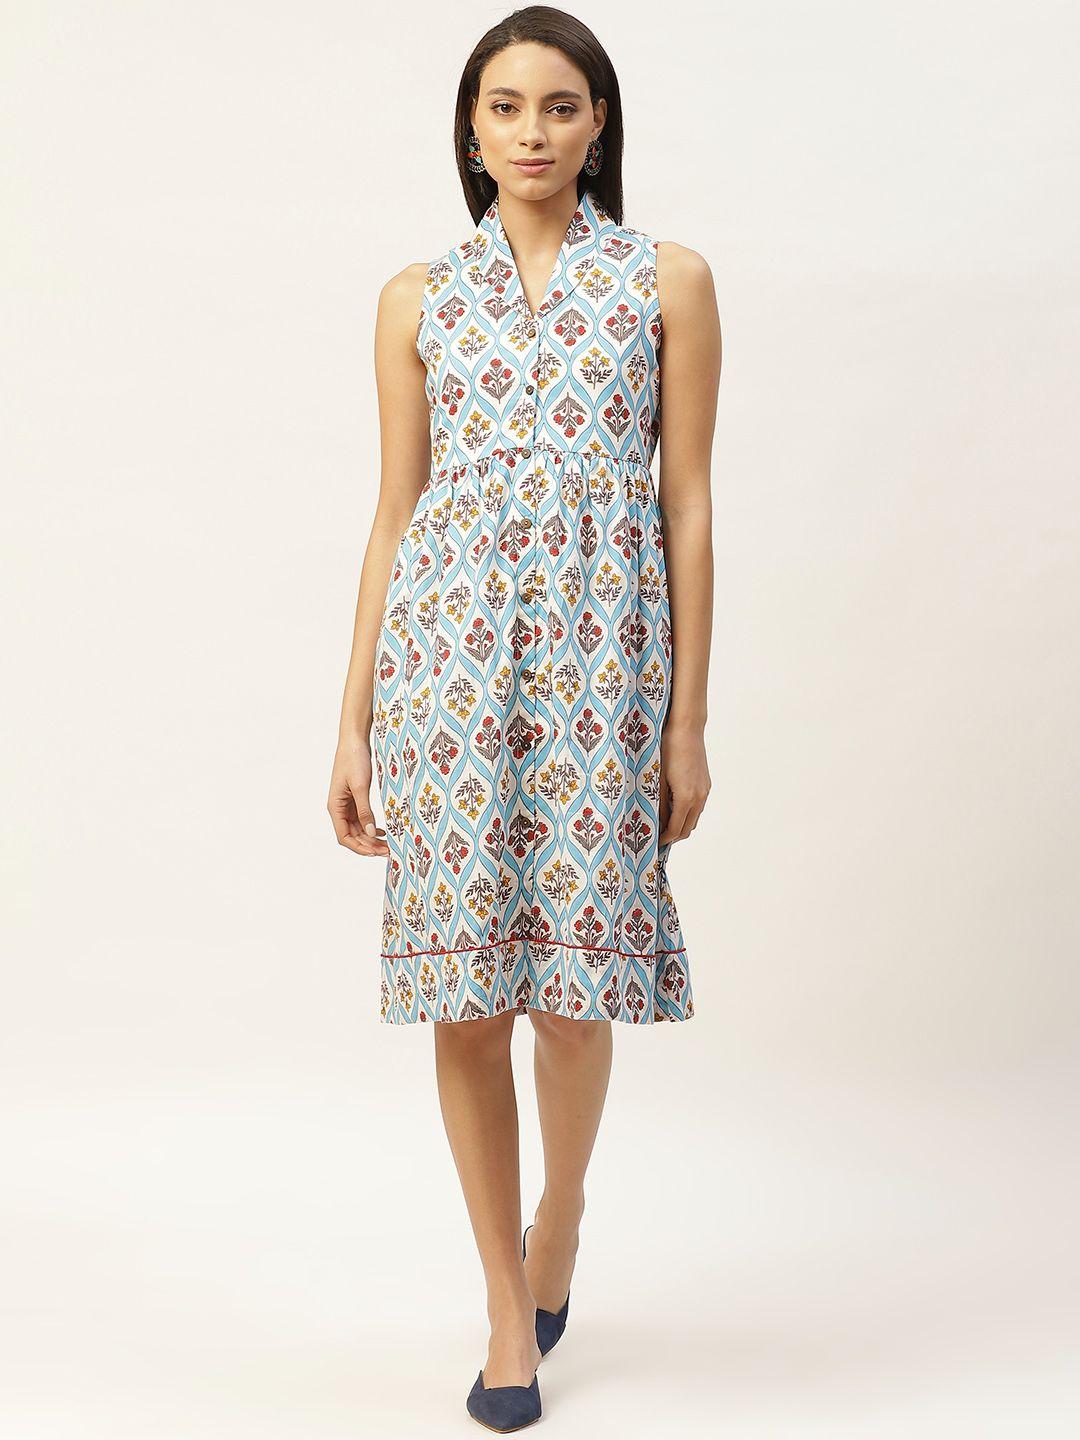 shae by sassafras women blue & white floral printed pure cotton a-line dress